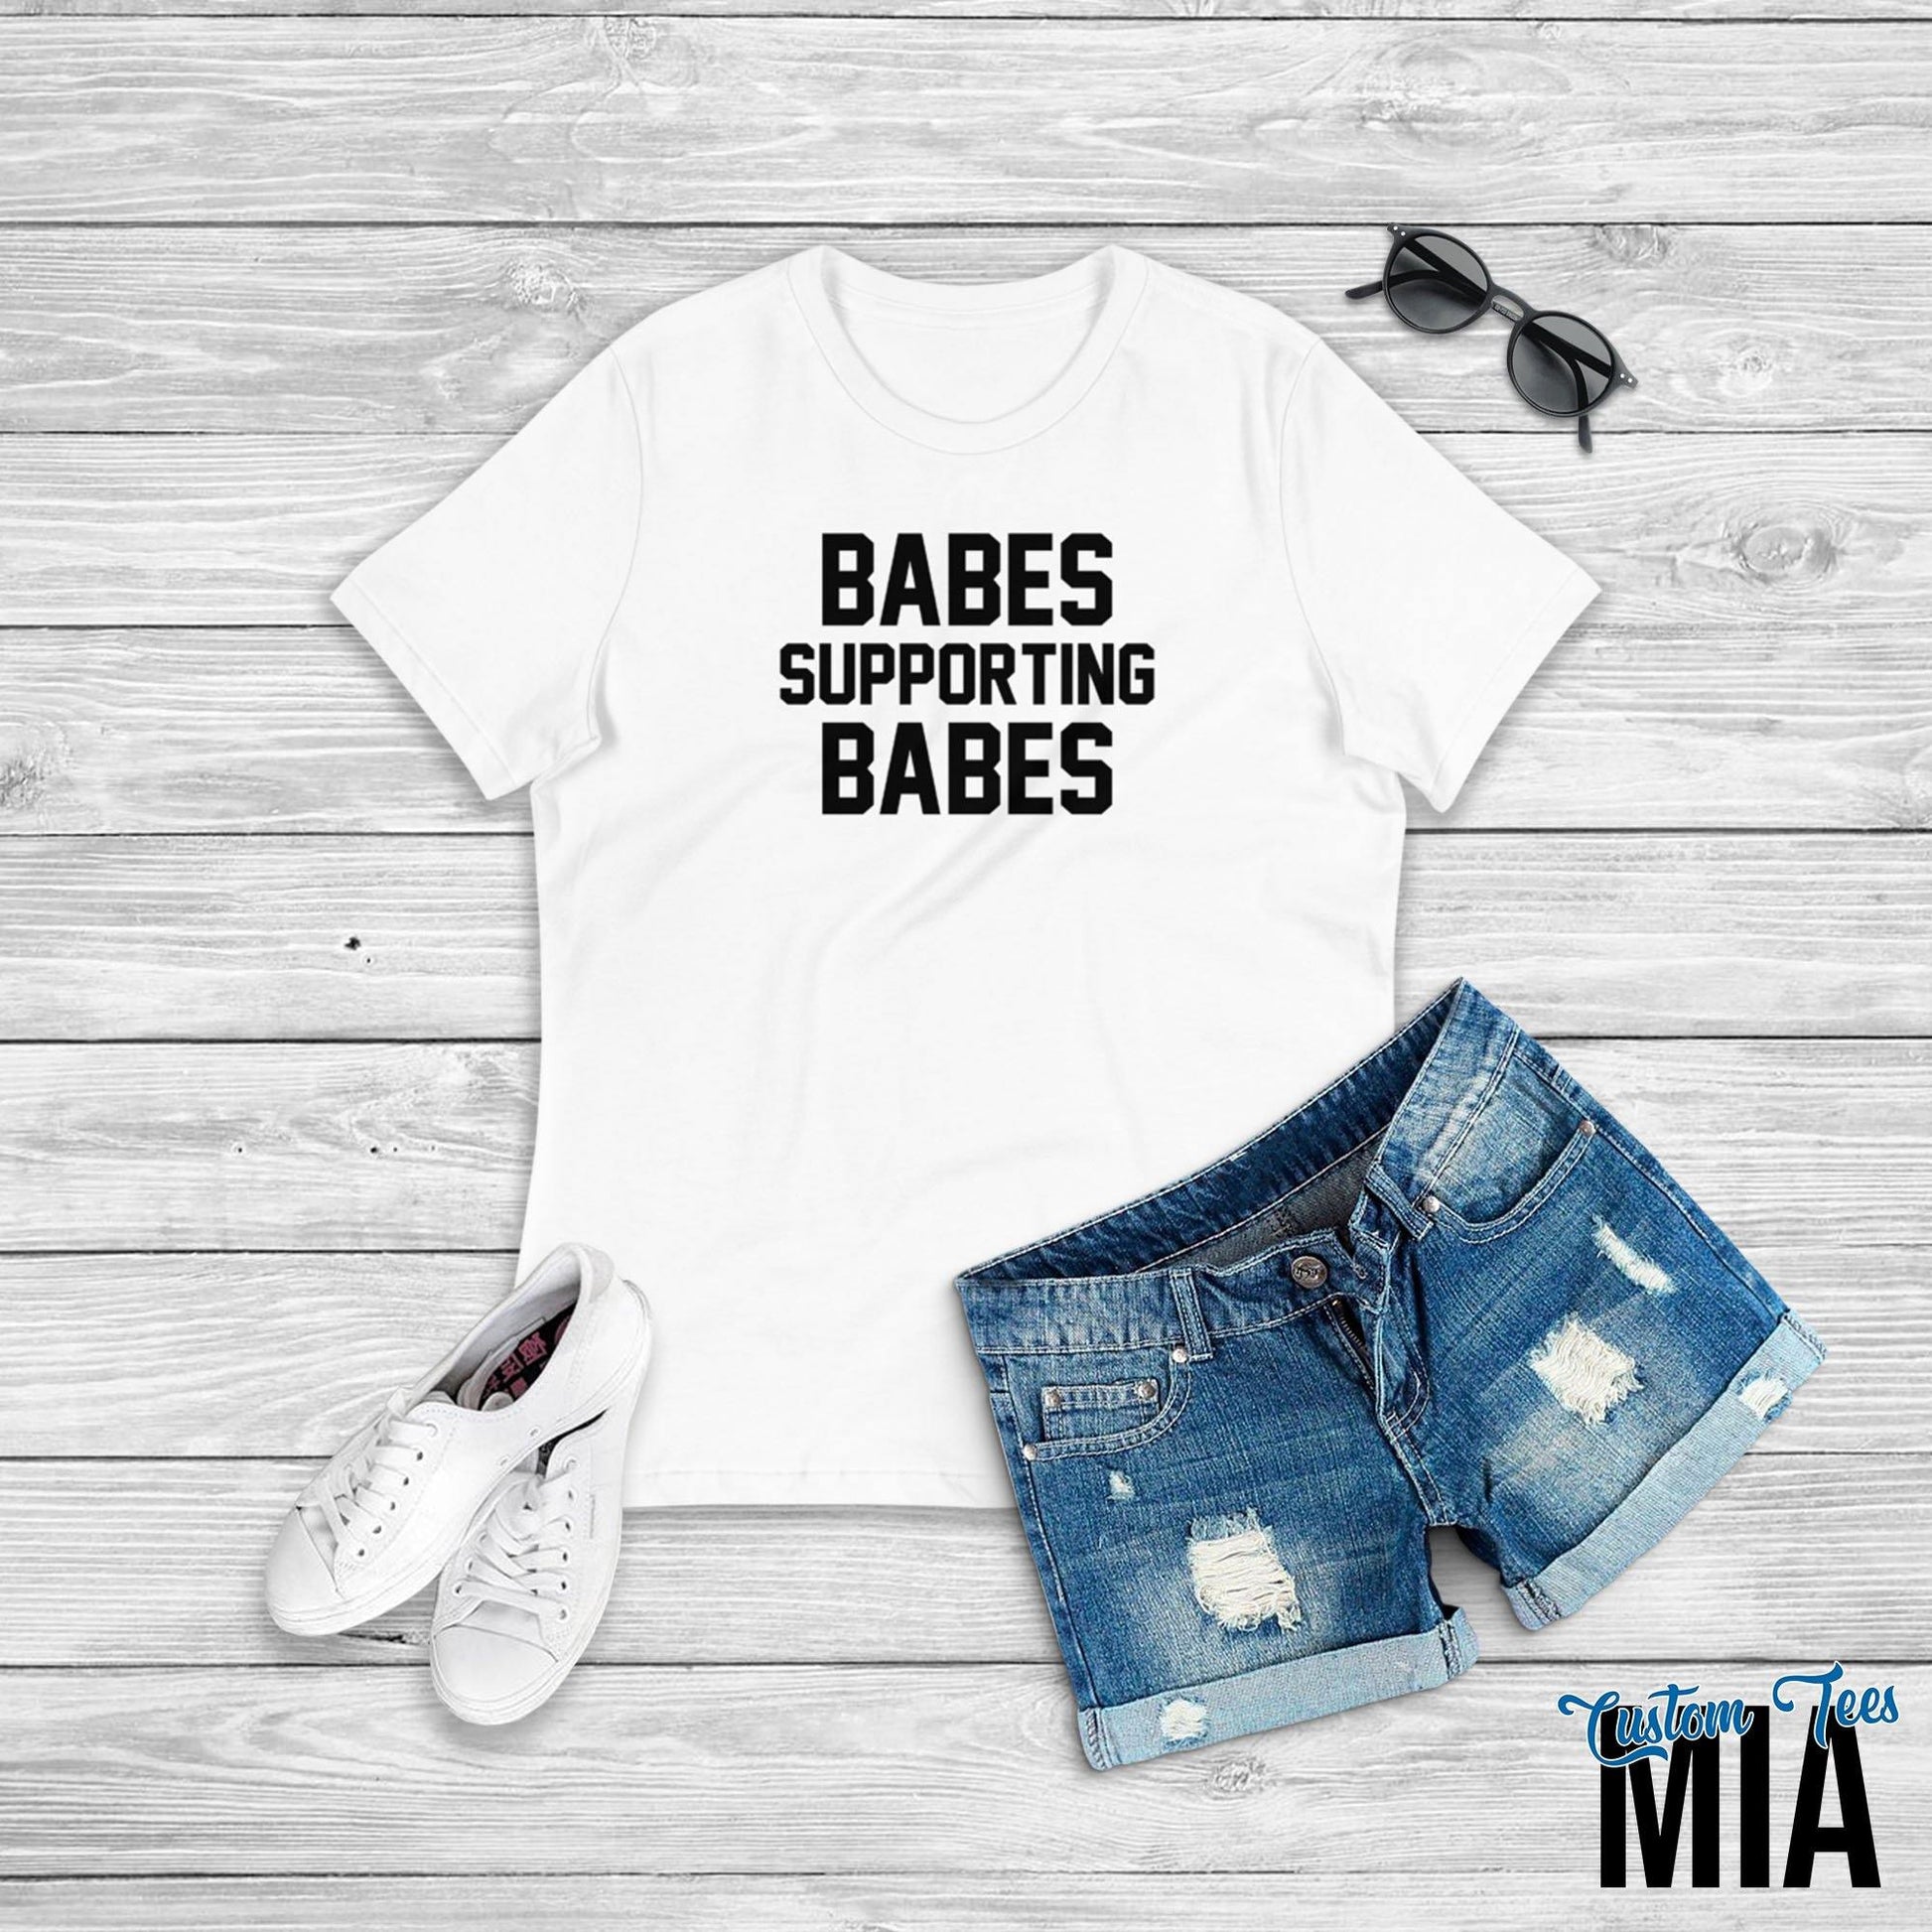 Babes Supporting Babes Shirt - Custom Tees MIA